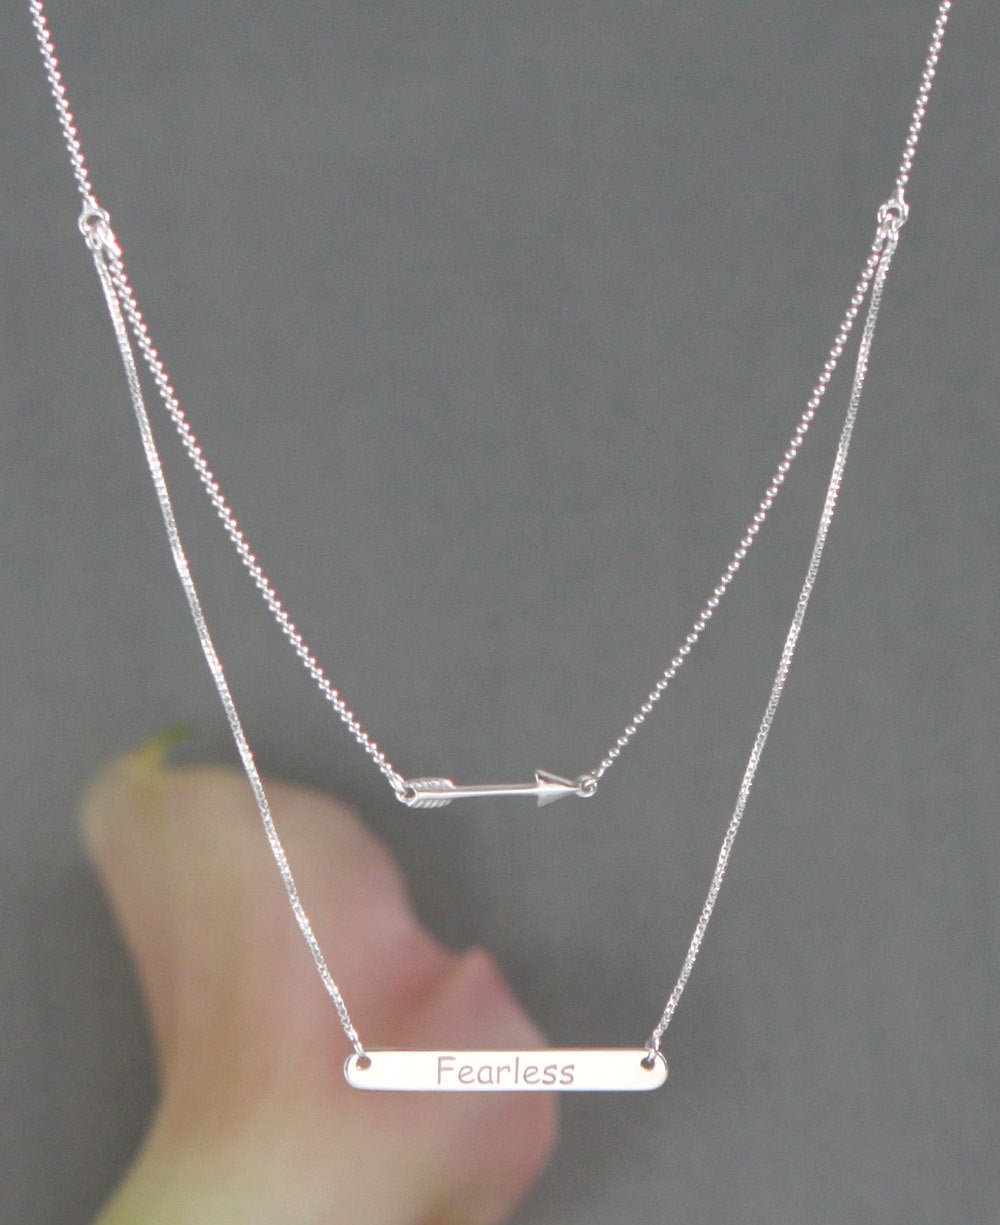 Inspirational Sterling Silver Layer Necklace, Fearless - Meaningful Jewelry